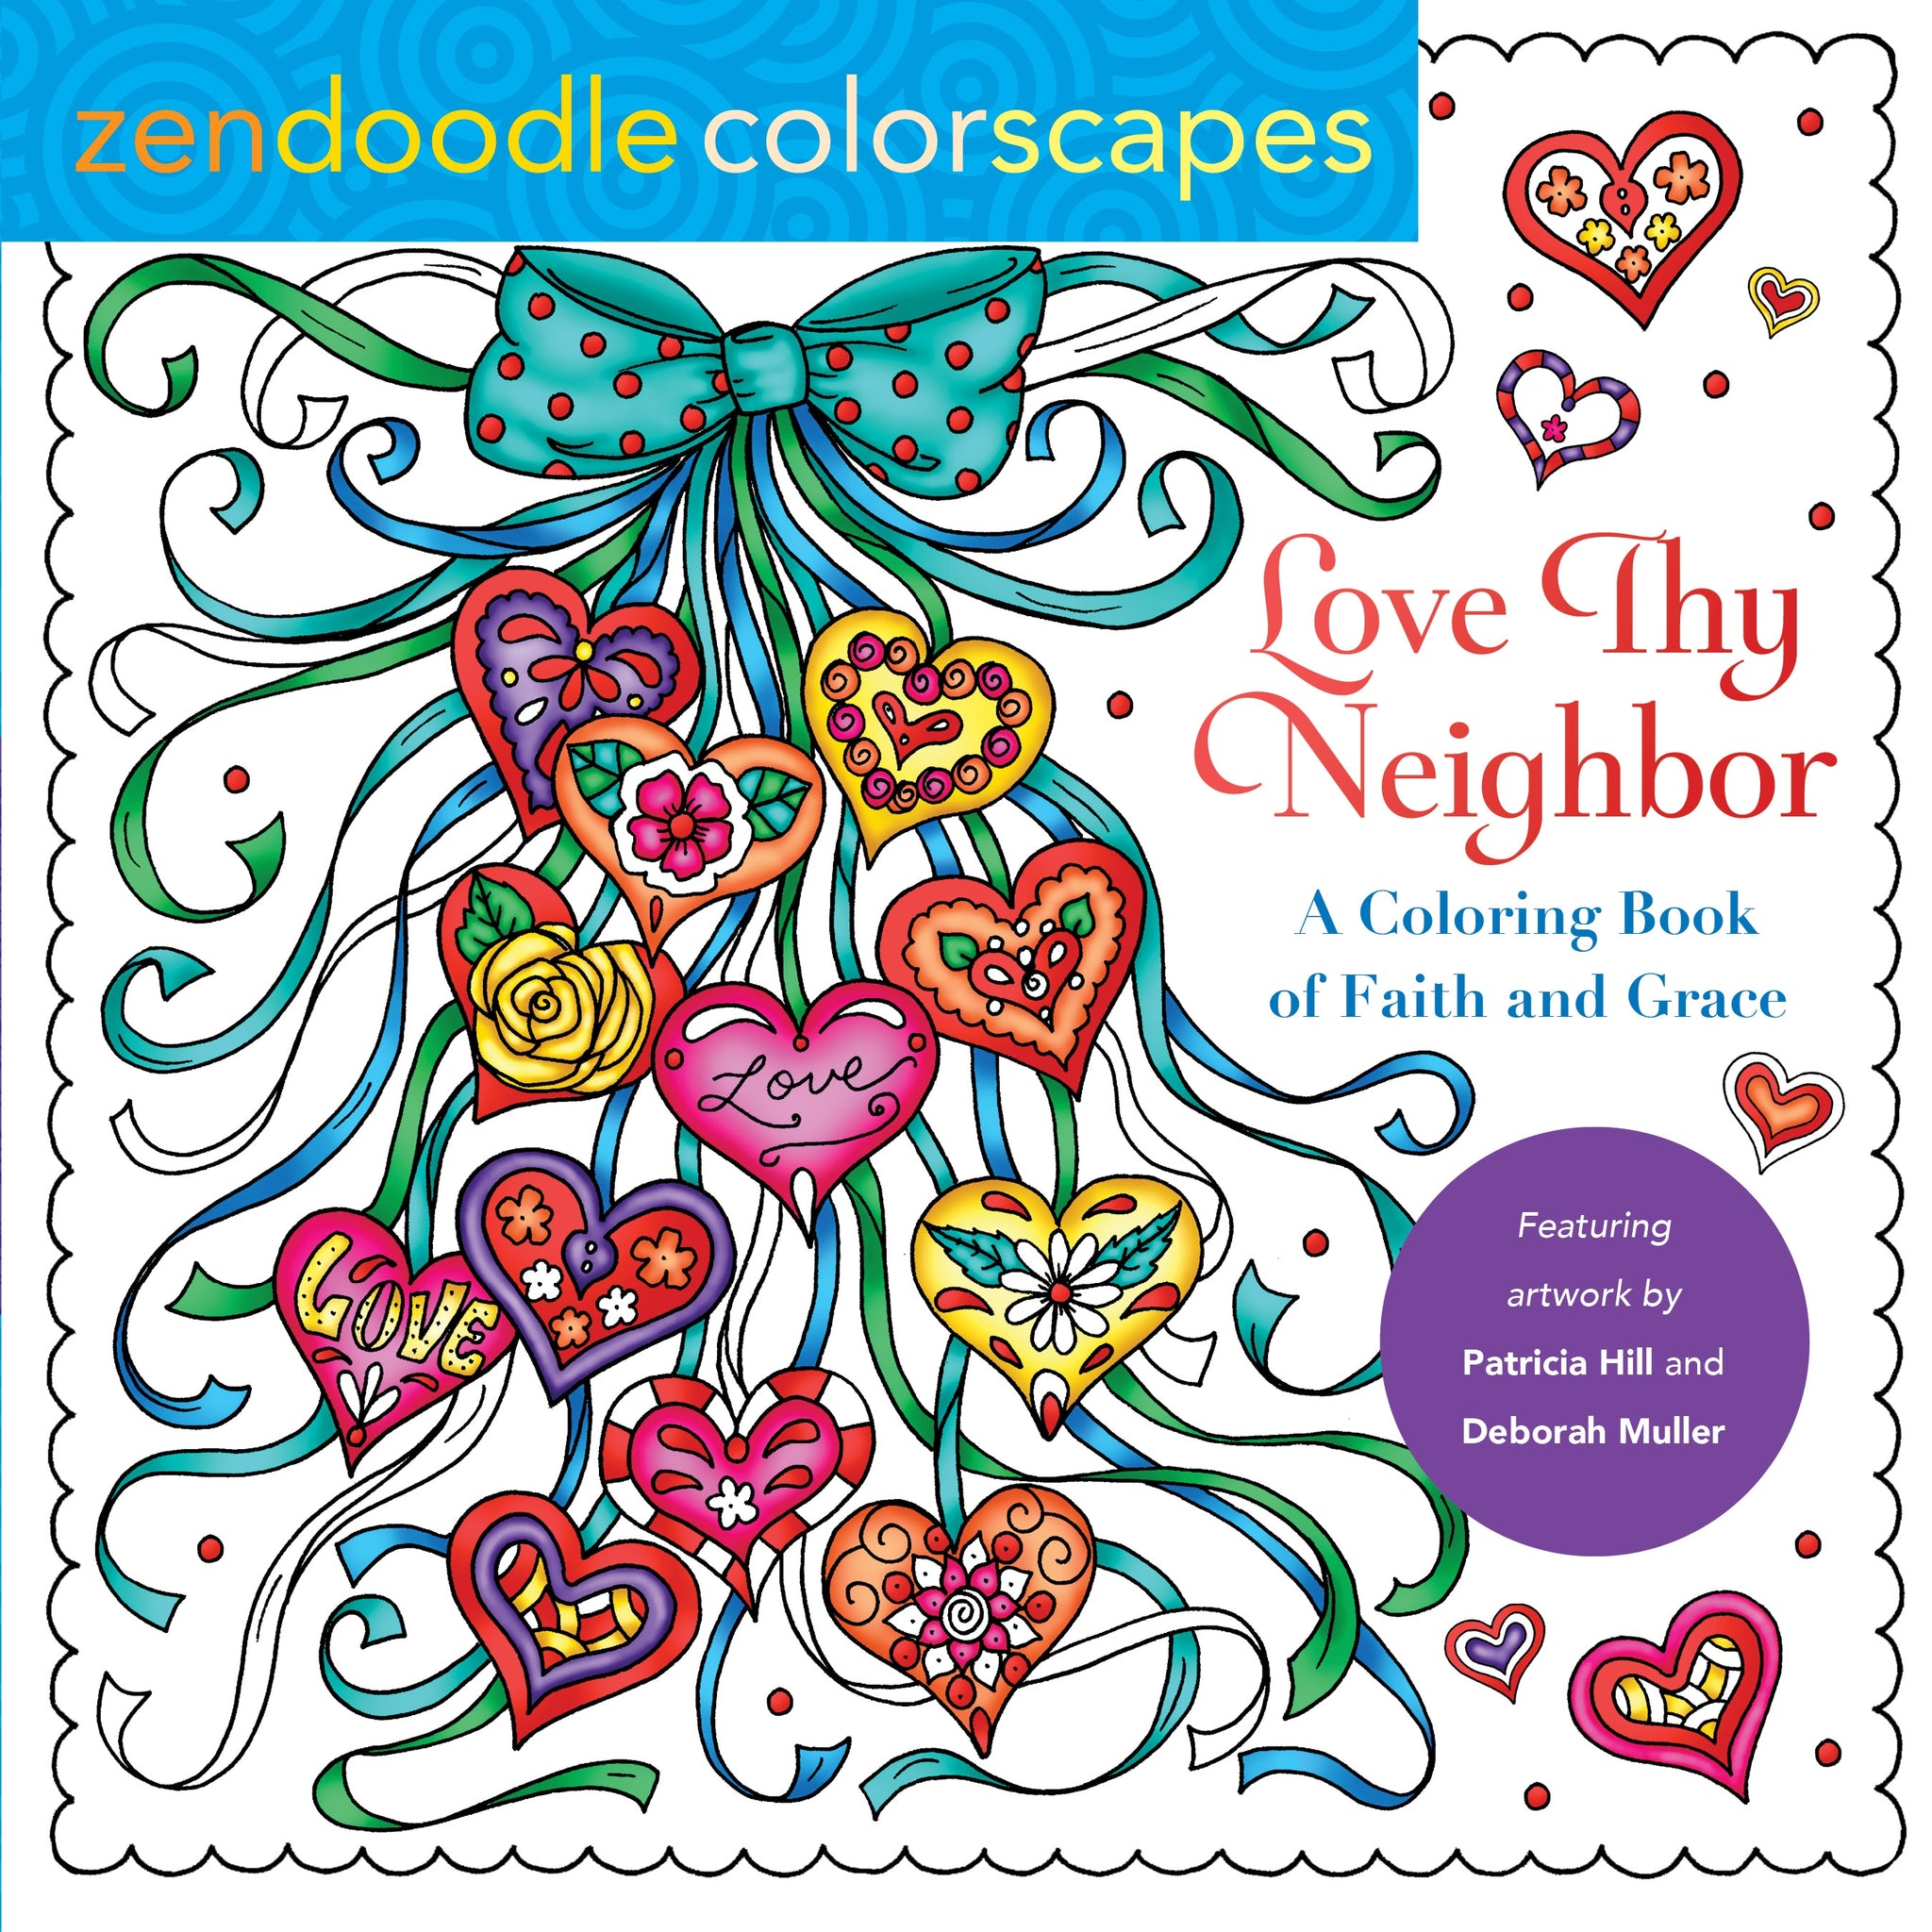 Zendoodle Colorscapes: Love Thy Neighbor : A Coloring Book of Faith and Grace